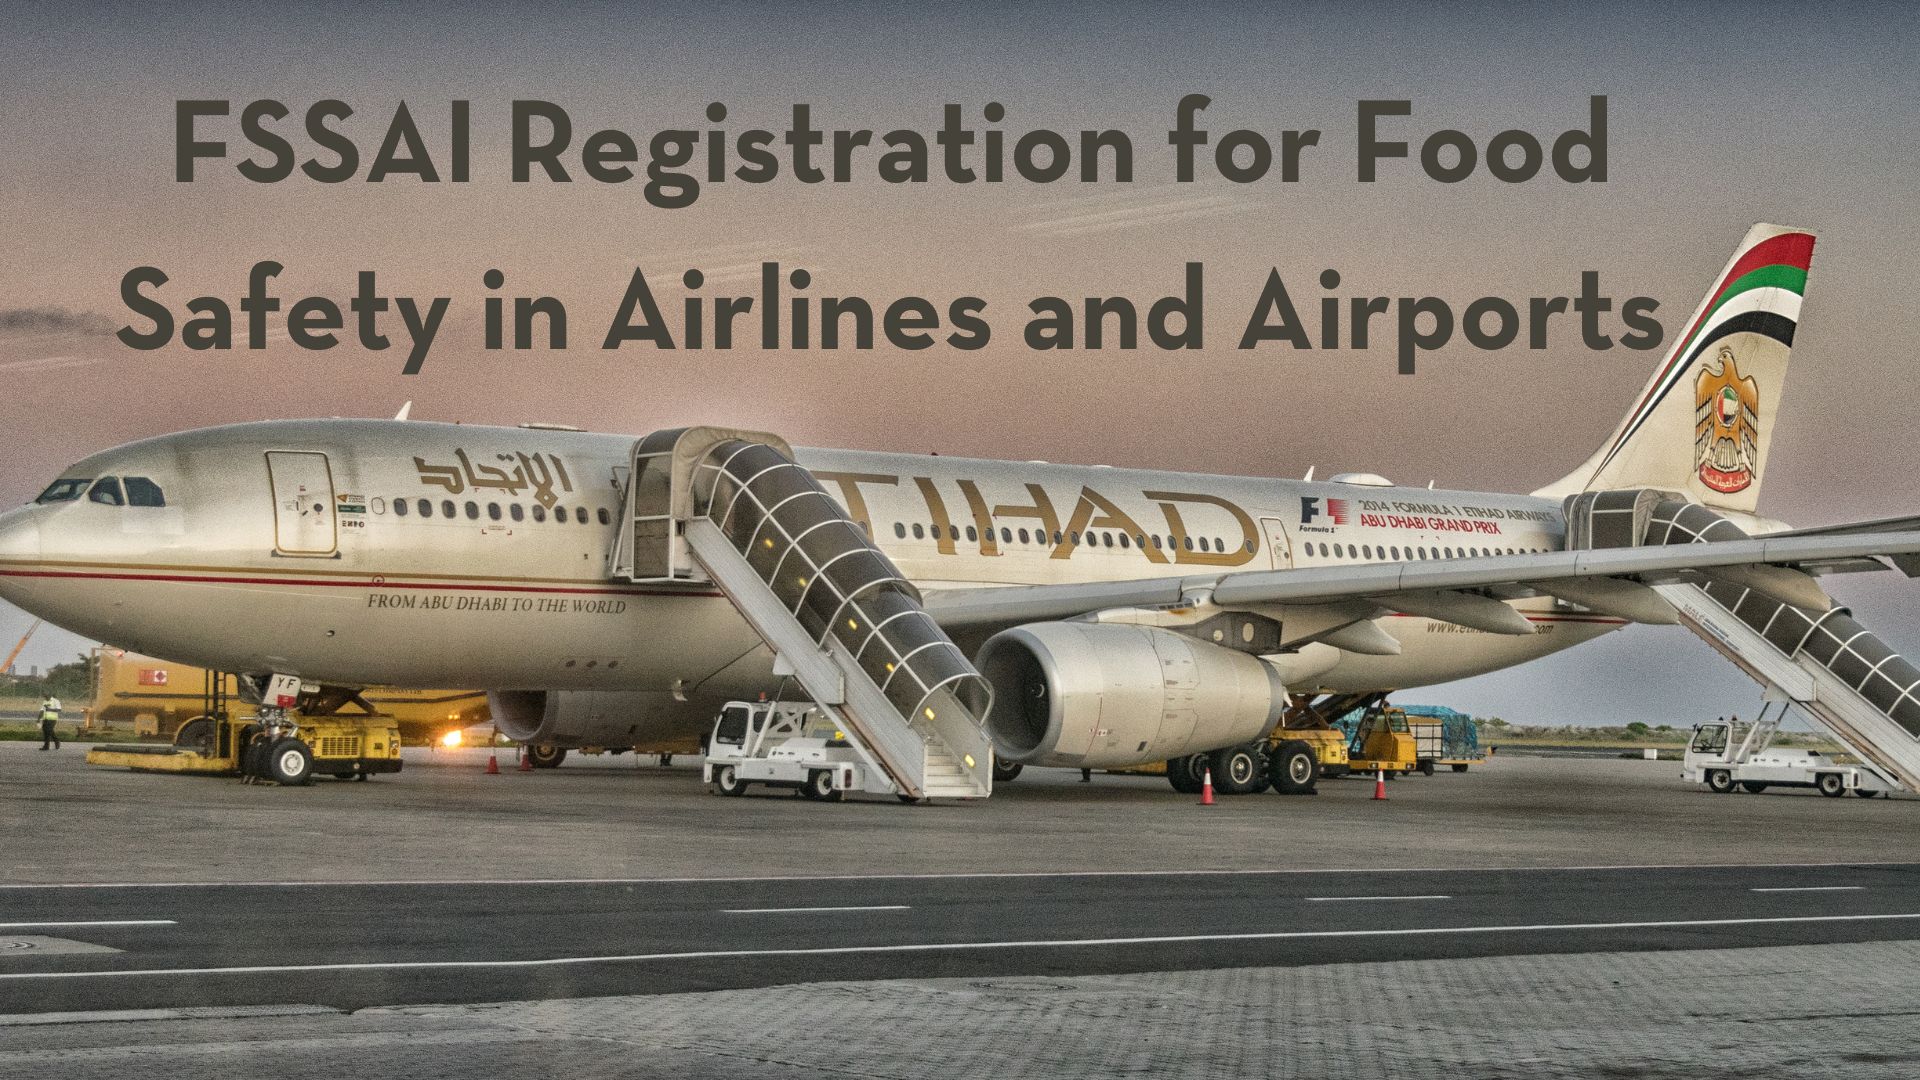 FSSAI Registration for Food Safety in Airlines and Airports